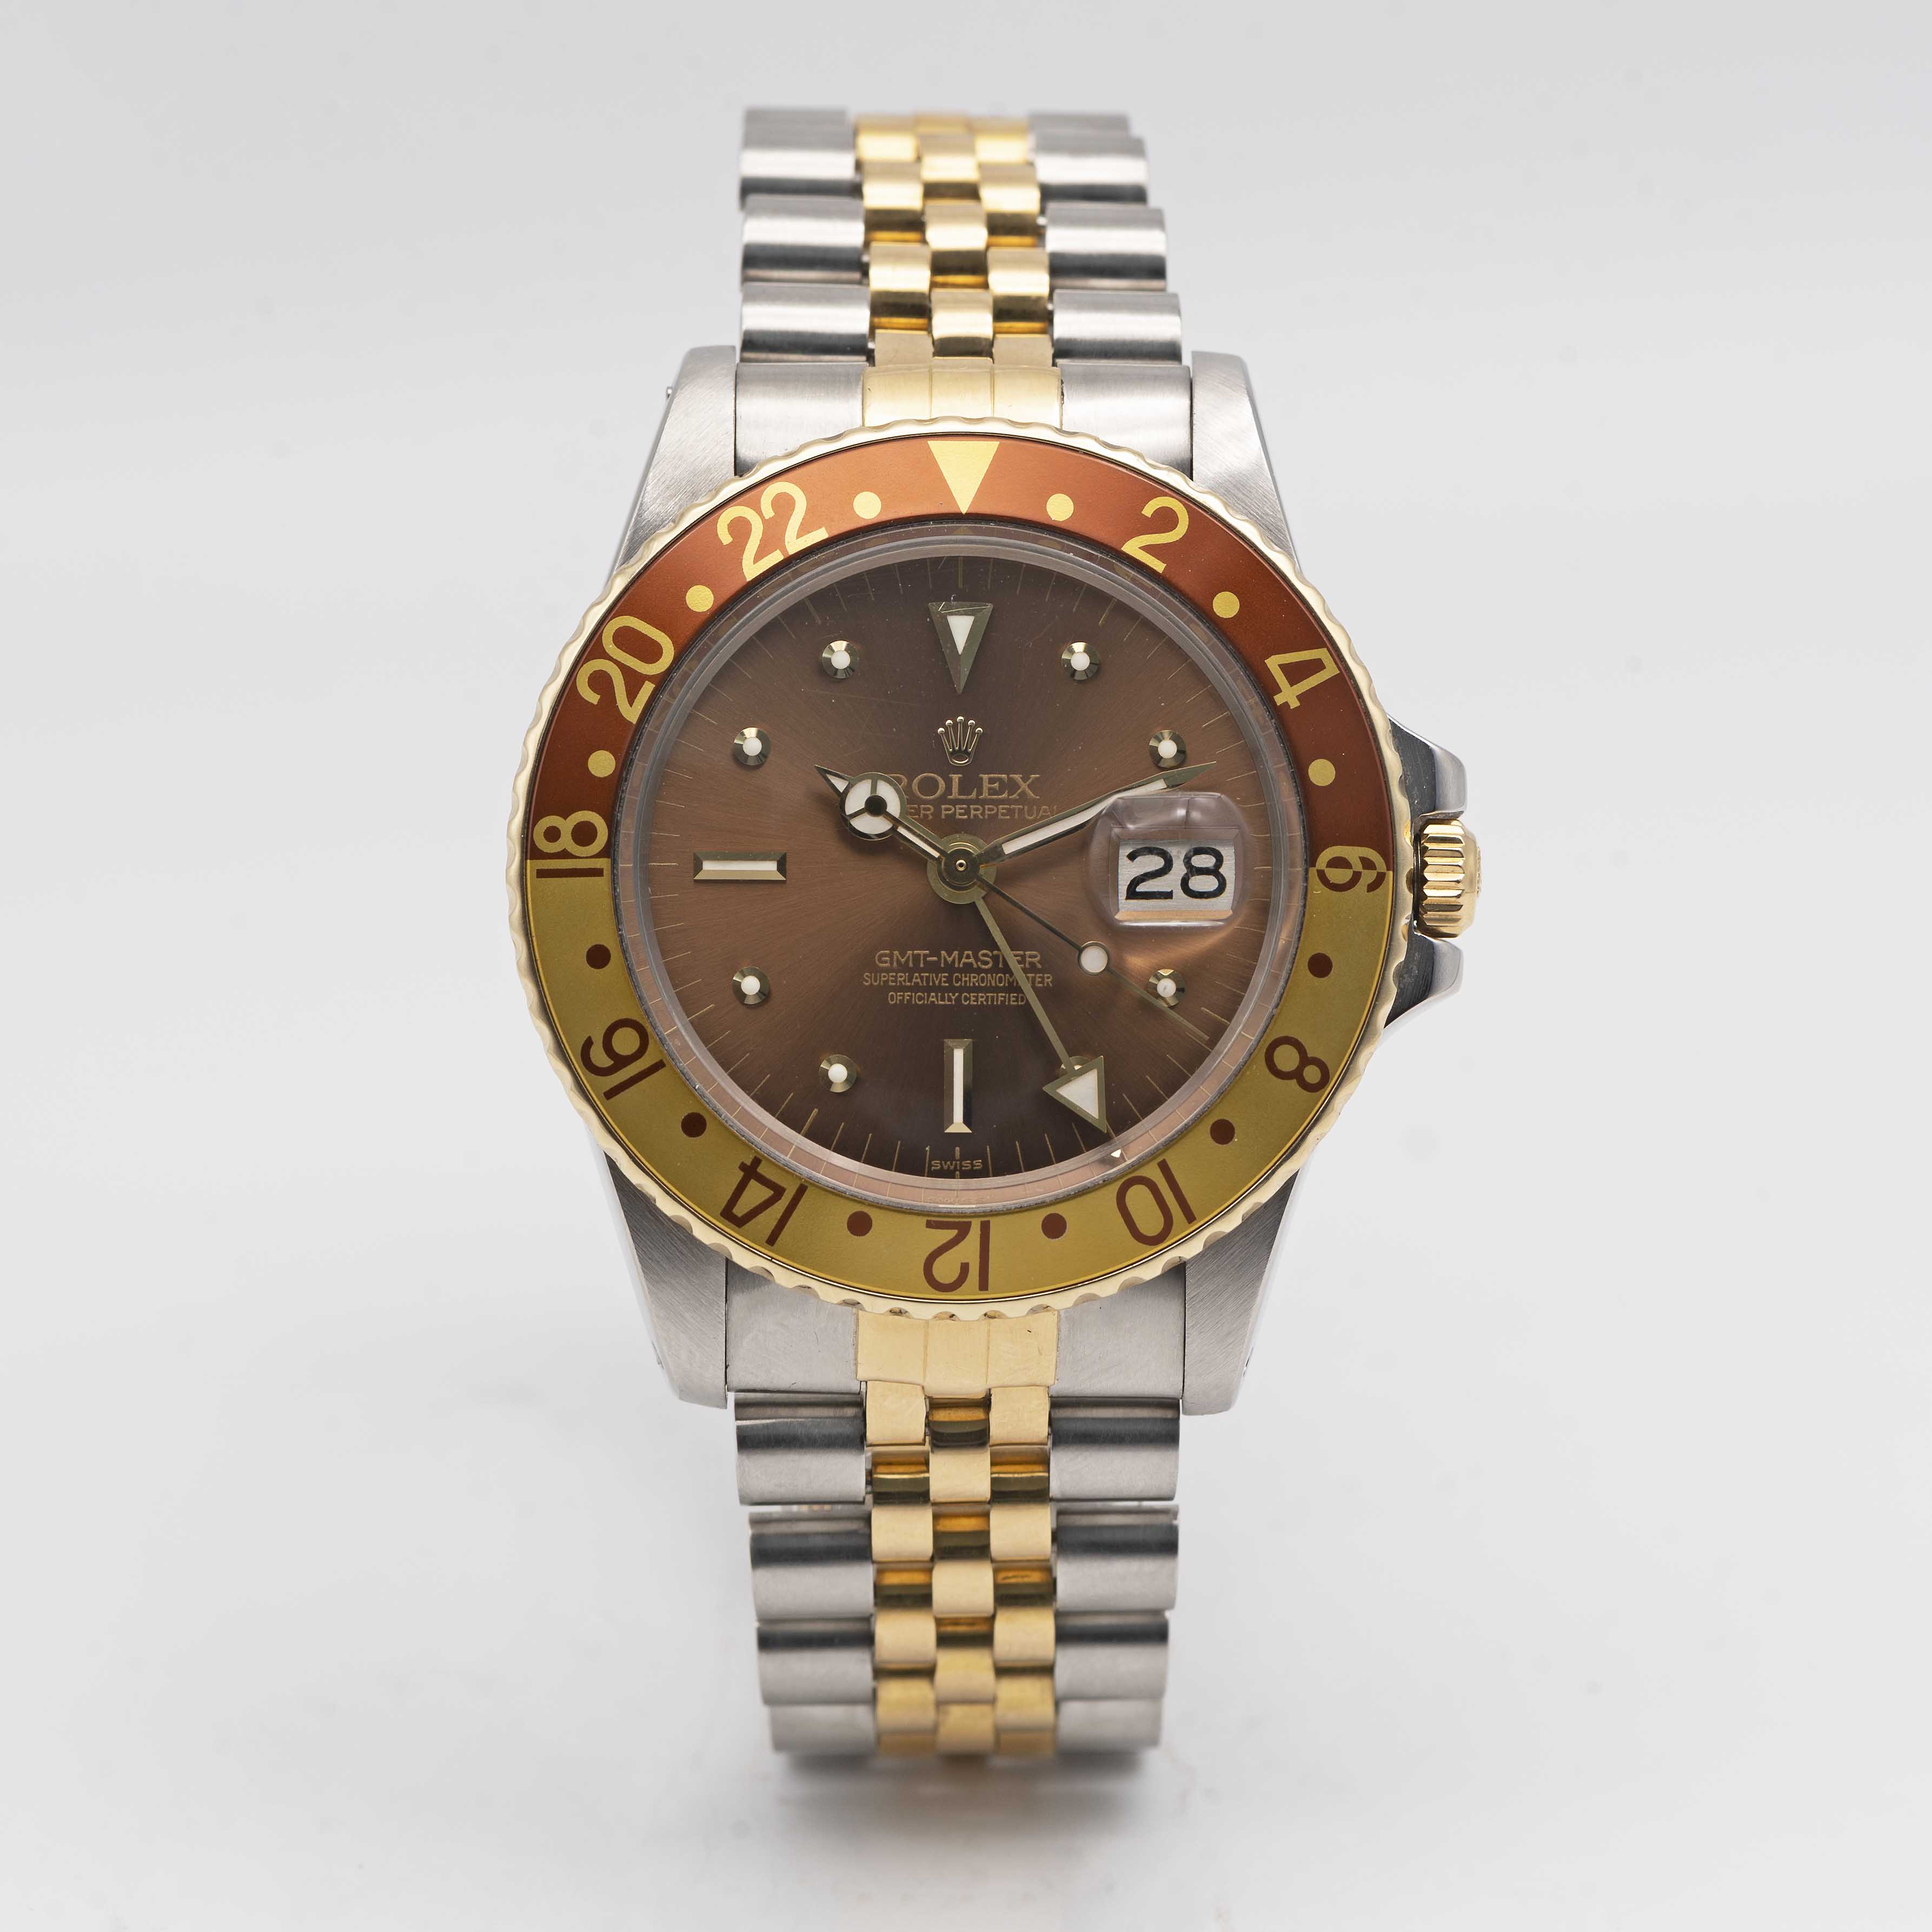 A GENTLEMAN'S STEEL & GOLD ROLEX OYSTER PERPETUAL GMT MASTER "ROOT BEER" BRACELET WATCH CIRCA - Image 2 of 9